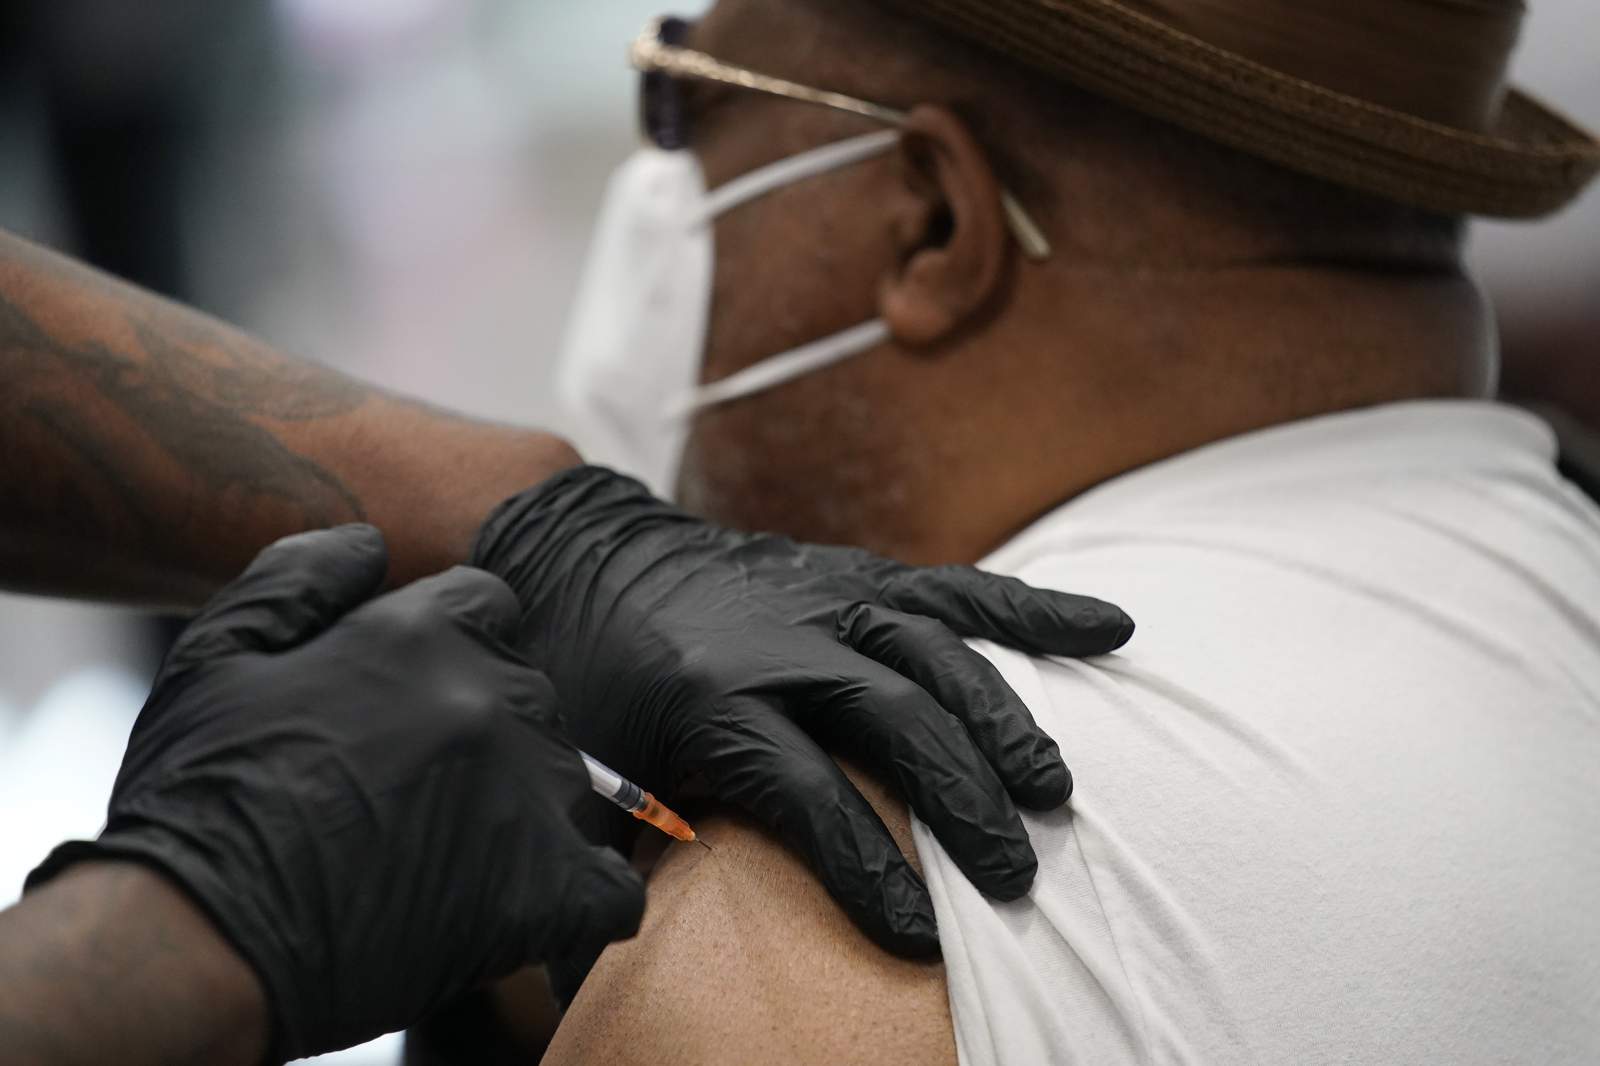 Locations announced for 1st mobile vaccine sites connected to Gateway Mall hub